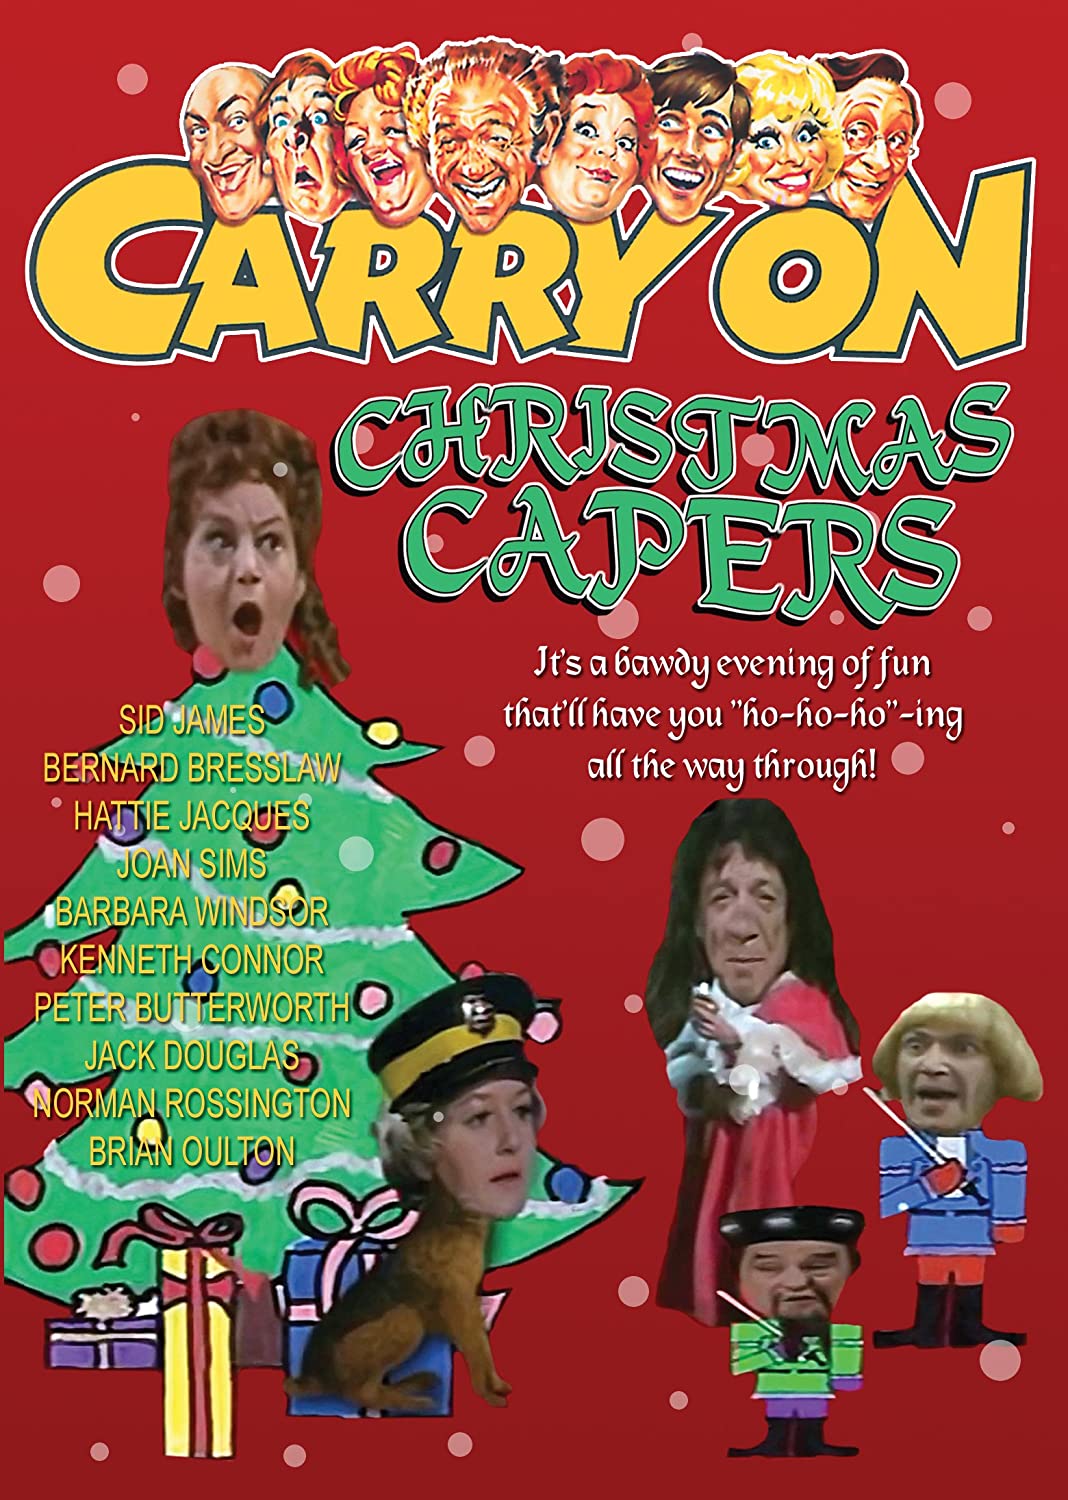 EN - Carry on Christmas (or Carry On Stuffing) (1972)